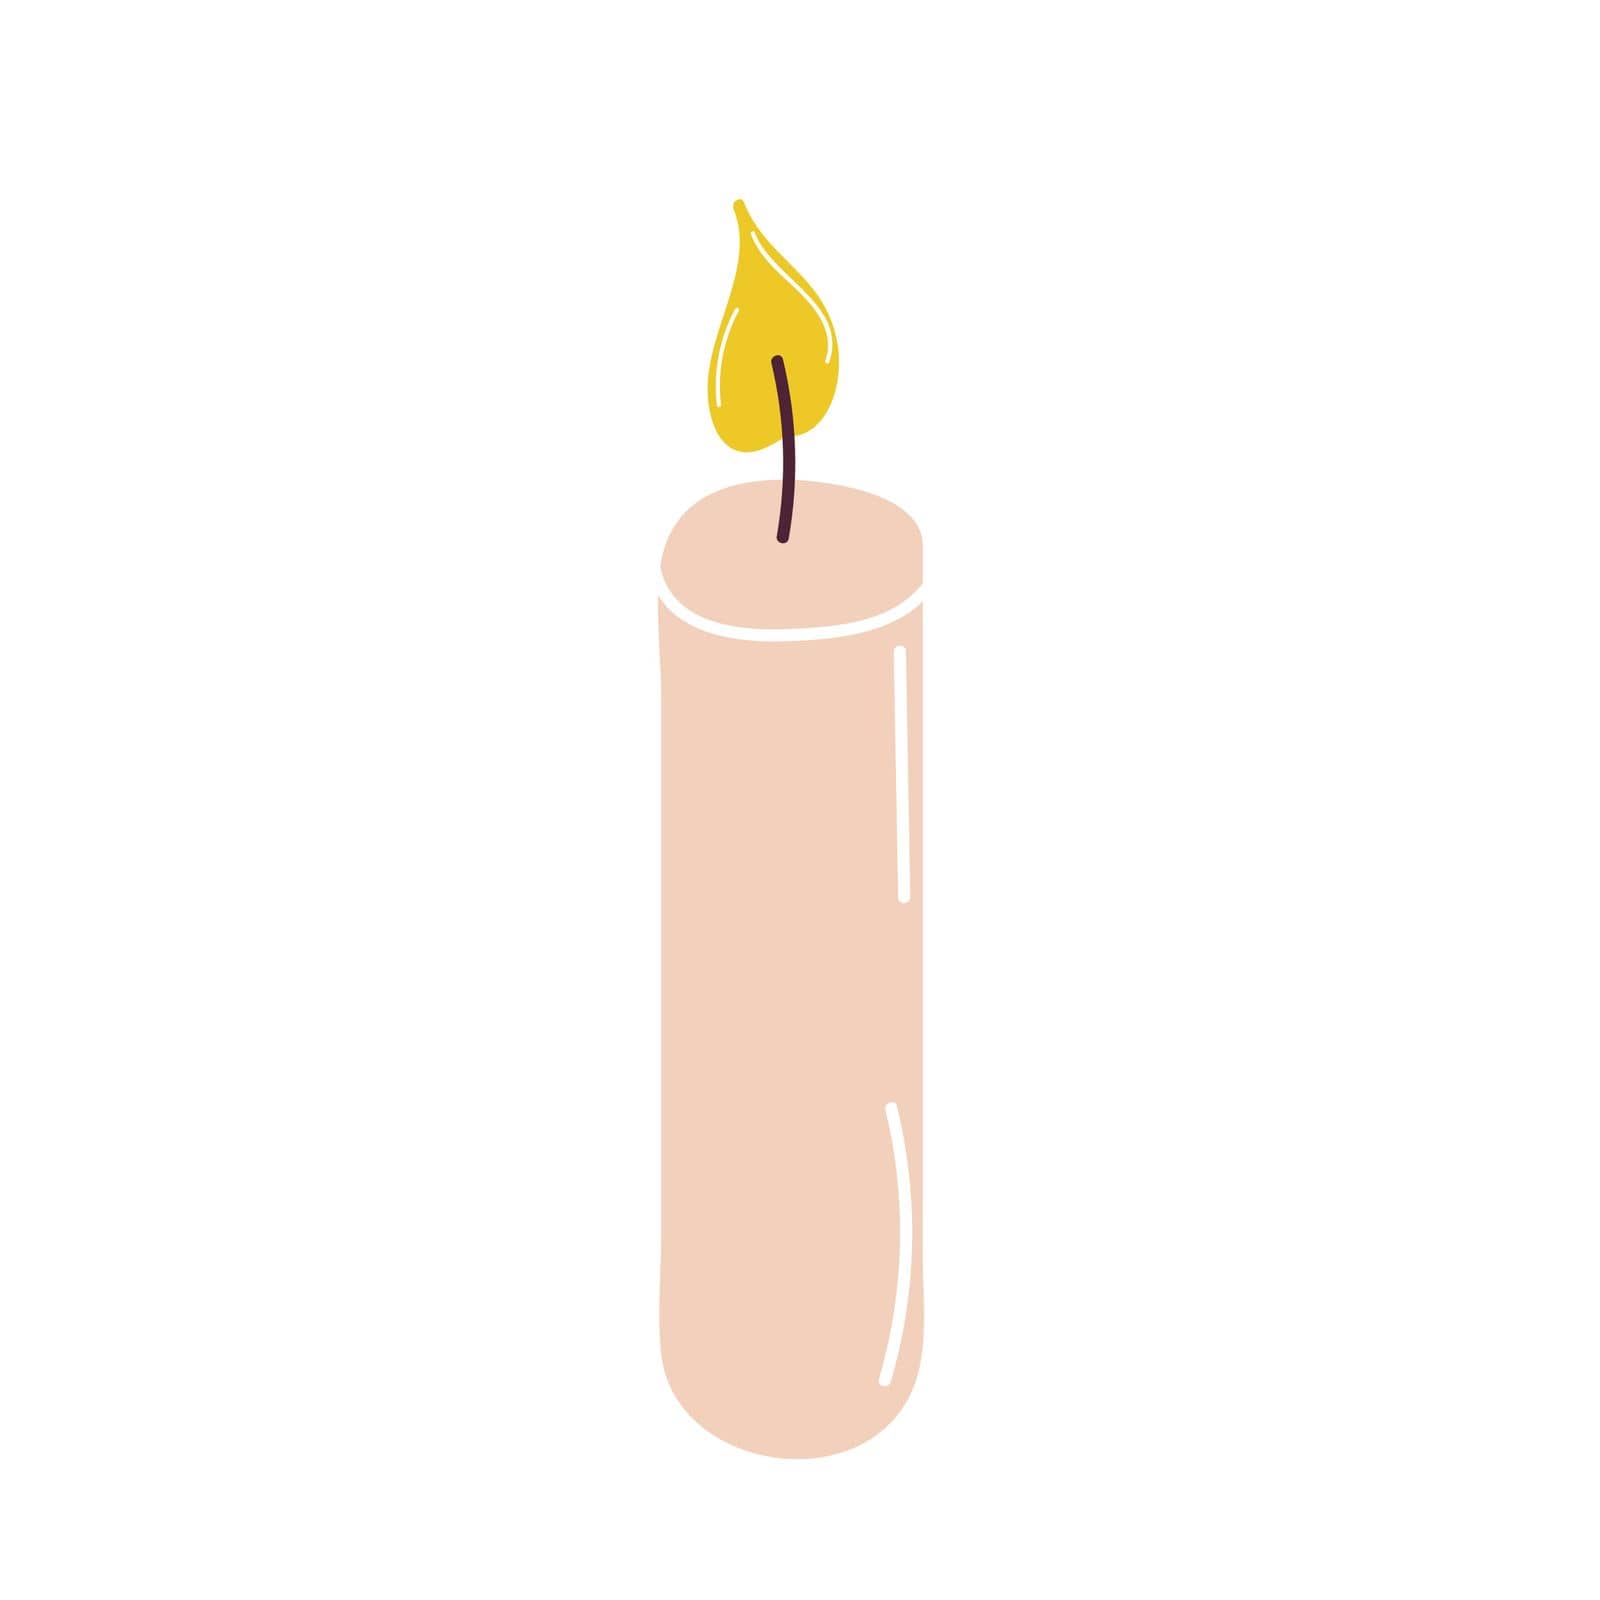 Burning candle for aromatherapy and interior decoration, isolated on a light background. Element for the design. Flat cartoon vector illustration